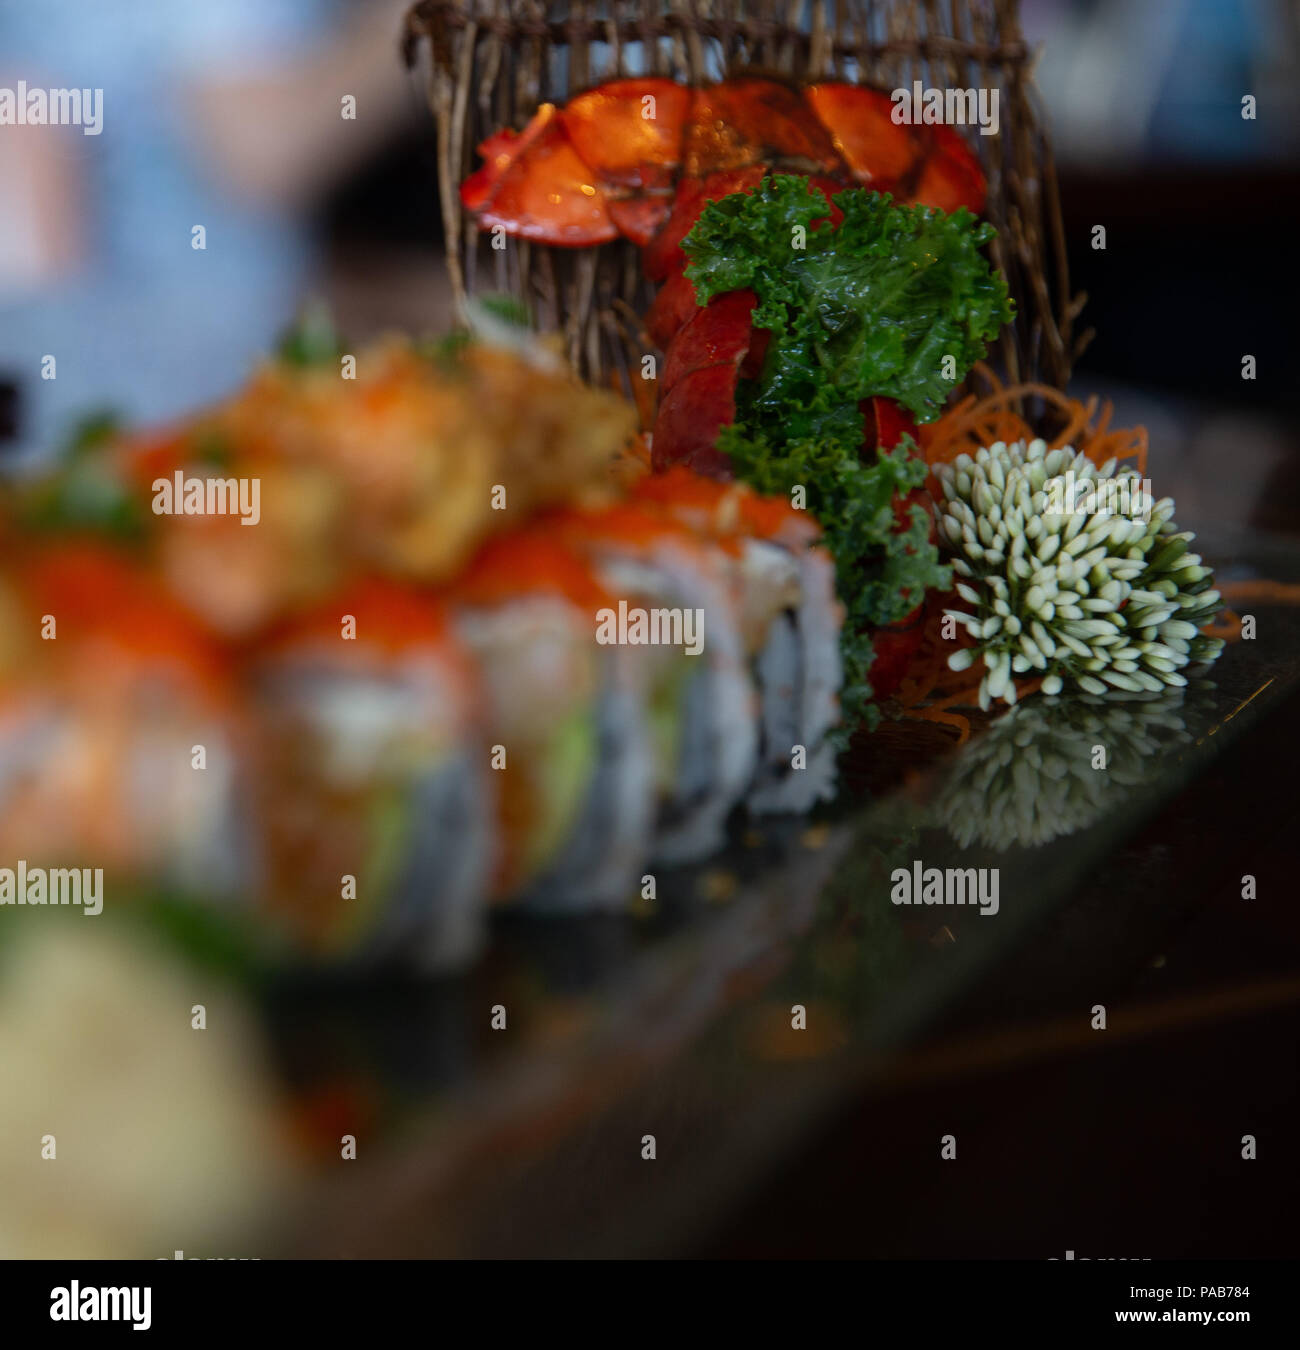 Faded Unknown Sushi Roll with Garnishes Stock Photo